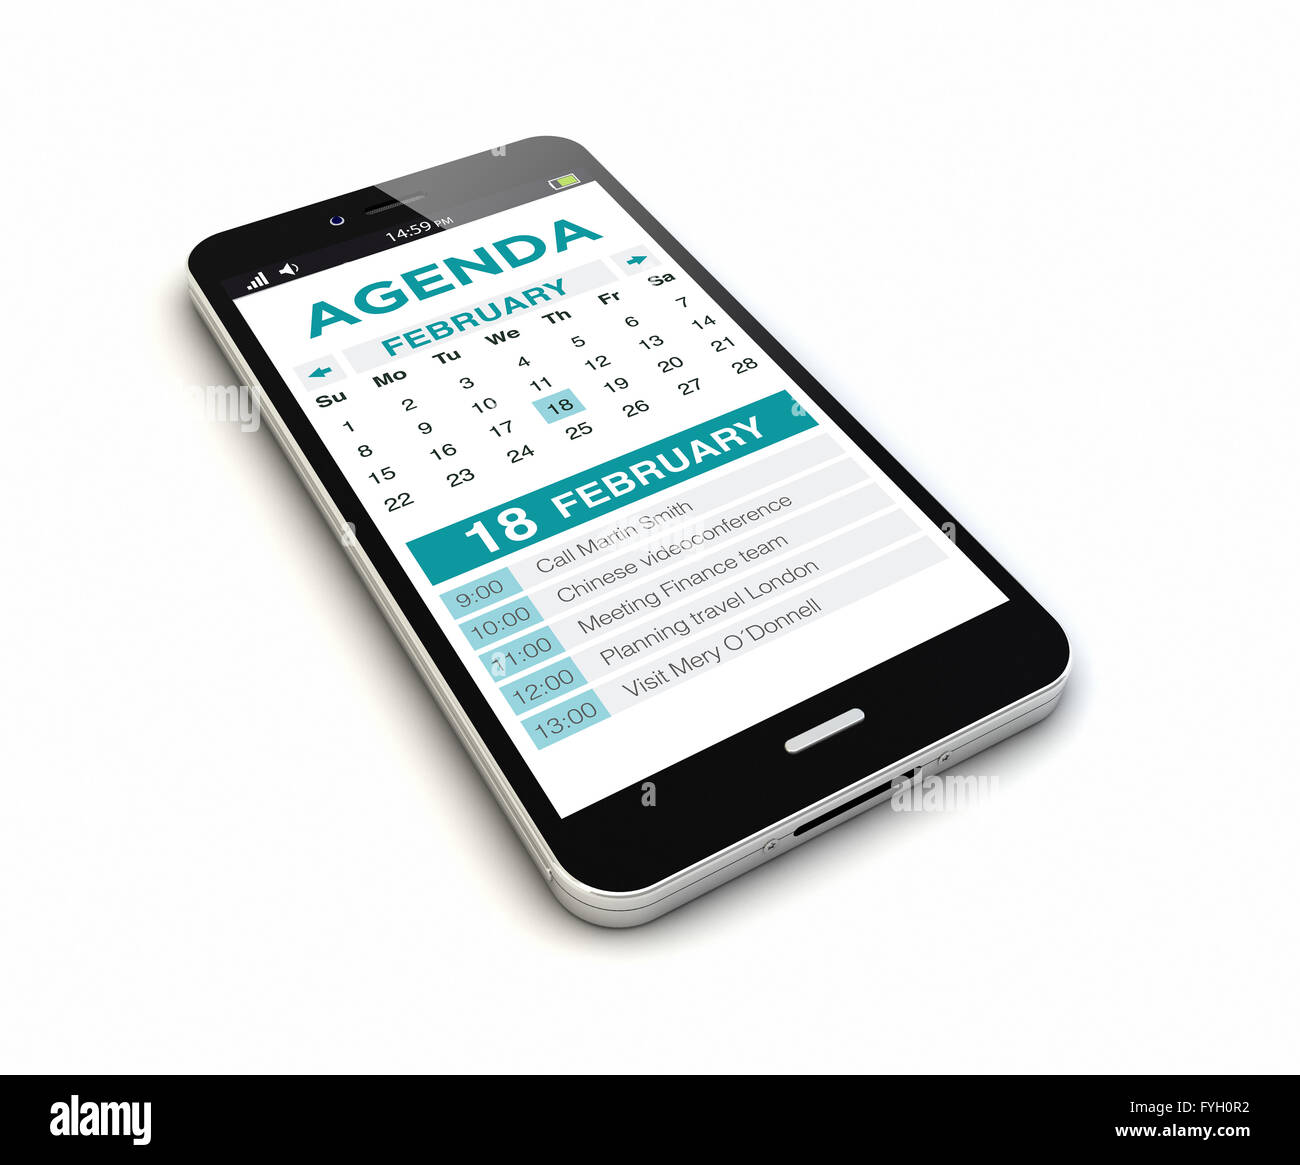 render of an original smartphone with agenda on the screen. Screen graphics are made up. Stock Photo